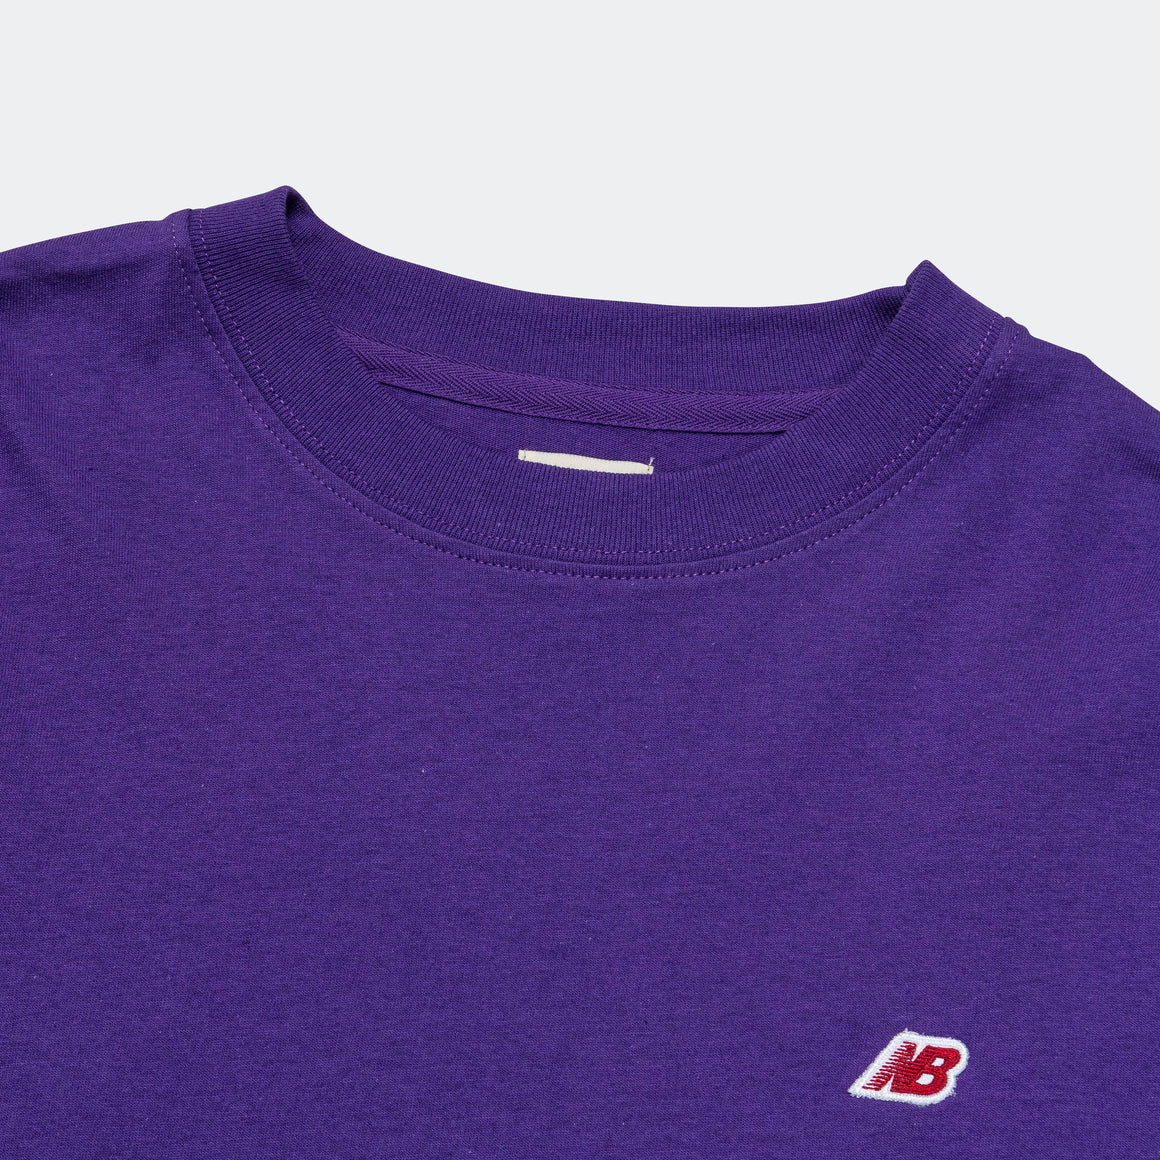 New Balance - MADE in USA Long Sleeve Tee - Prism Purple - UP THERE